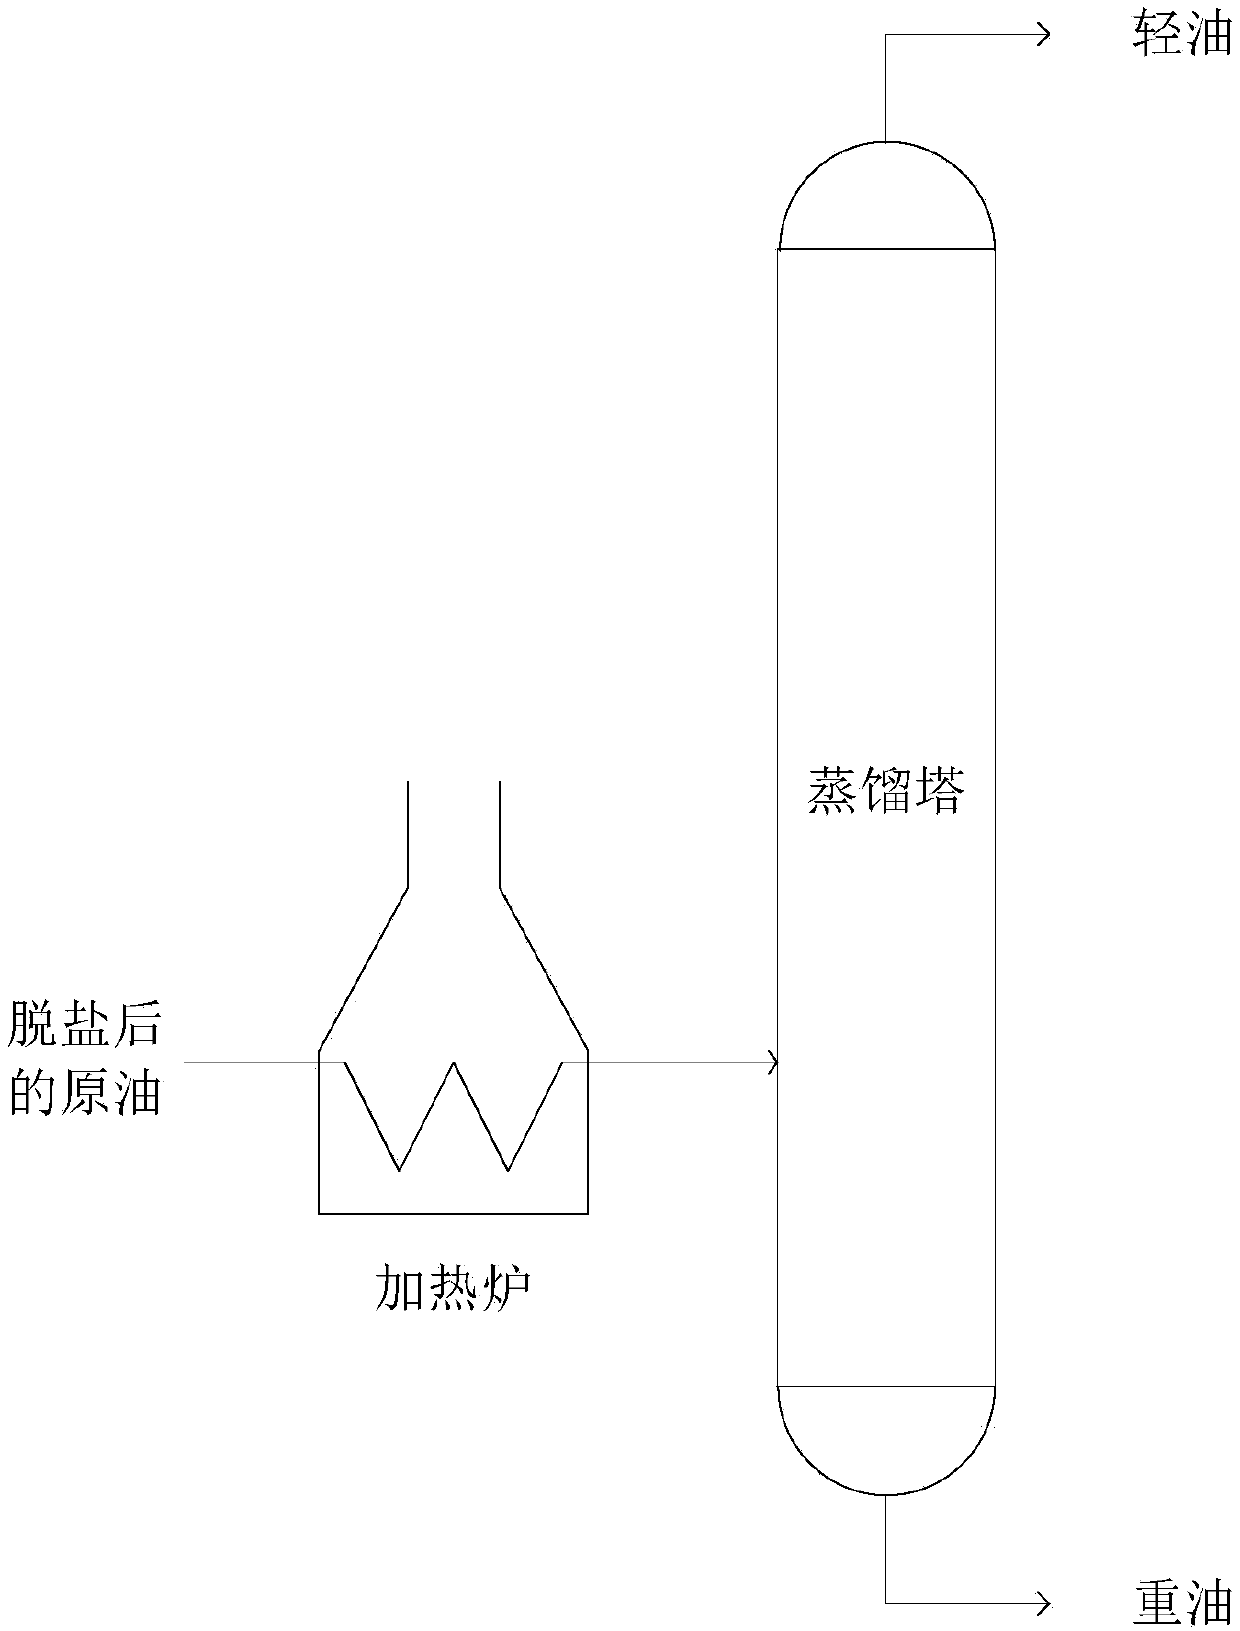 Crude oil catalytic cracking low carbon olefin and aromatic hydrocarbon preparing method